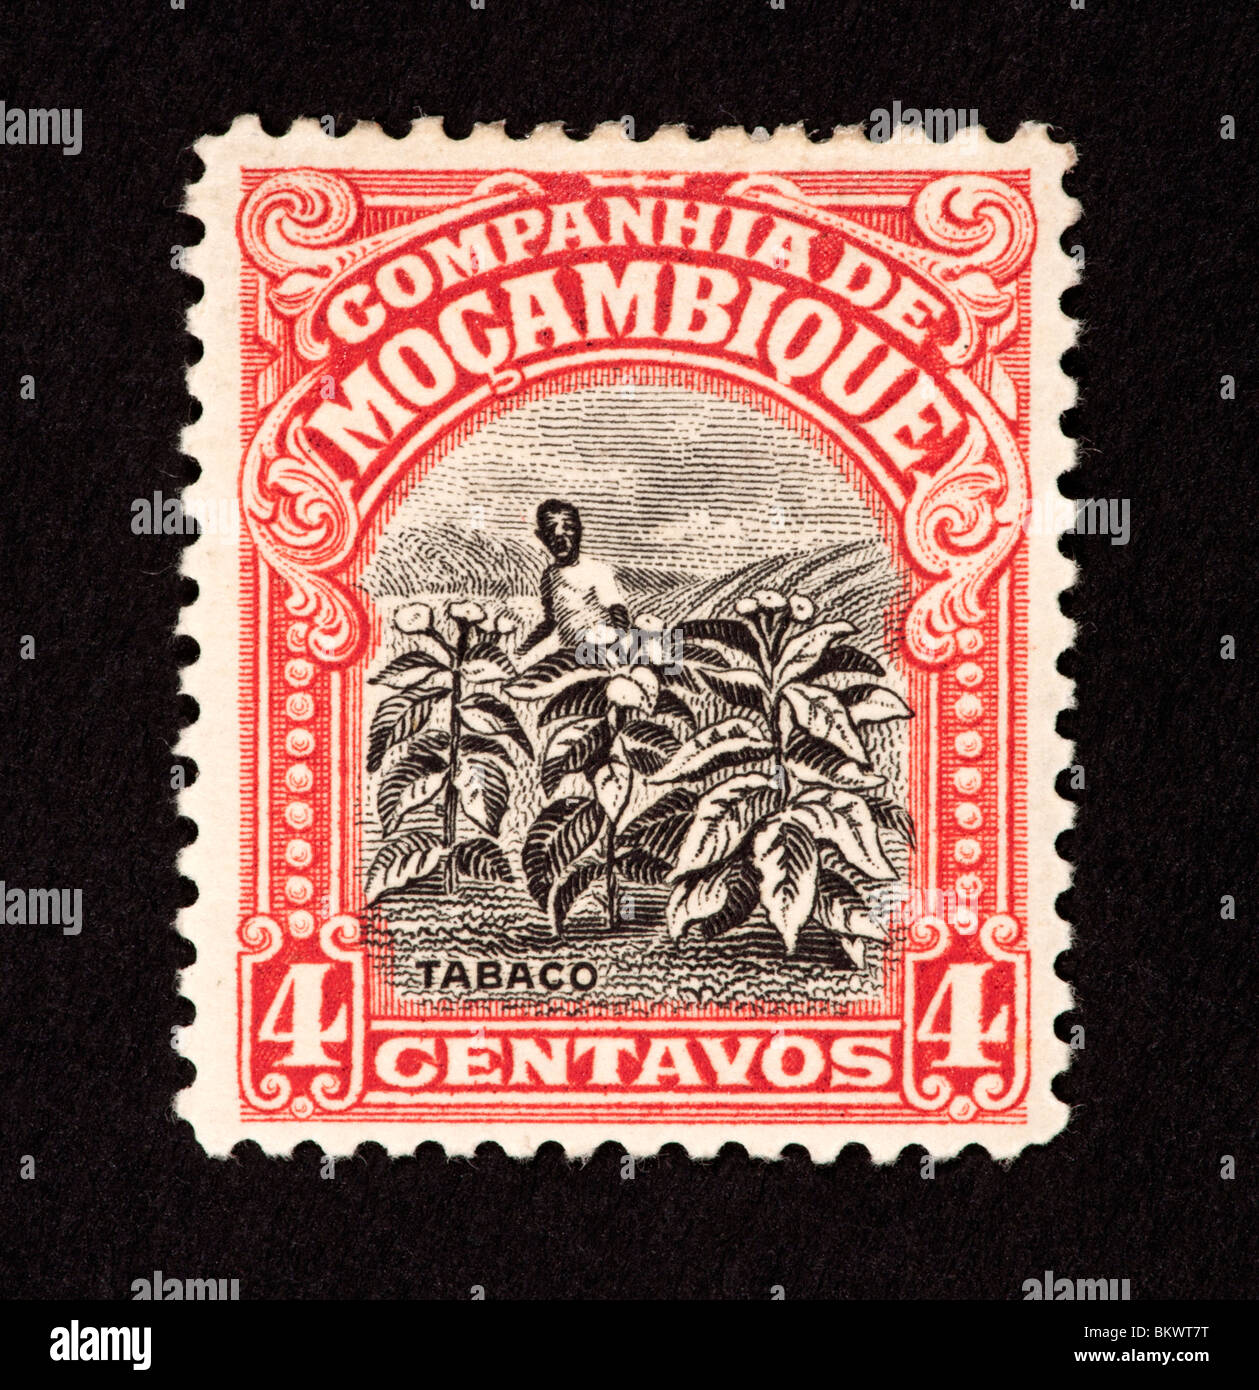 Postage stamp issued by the Mozambique Company depicting tobacco farming. Stock Photo